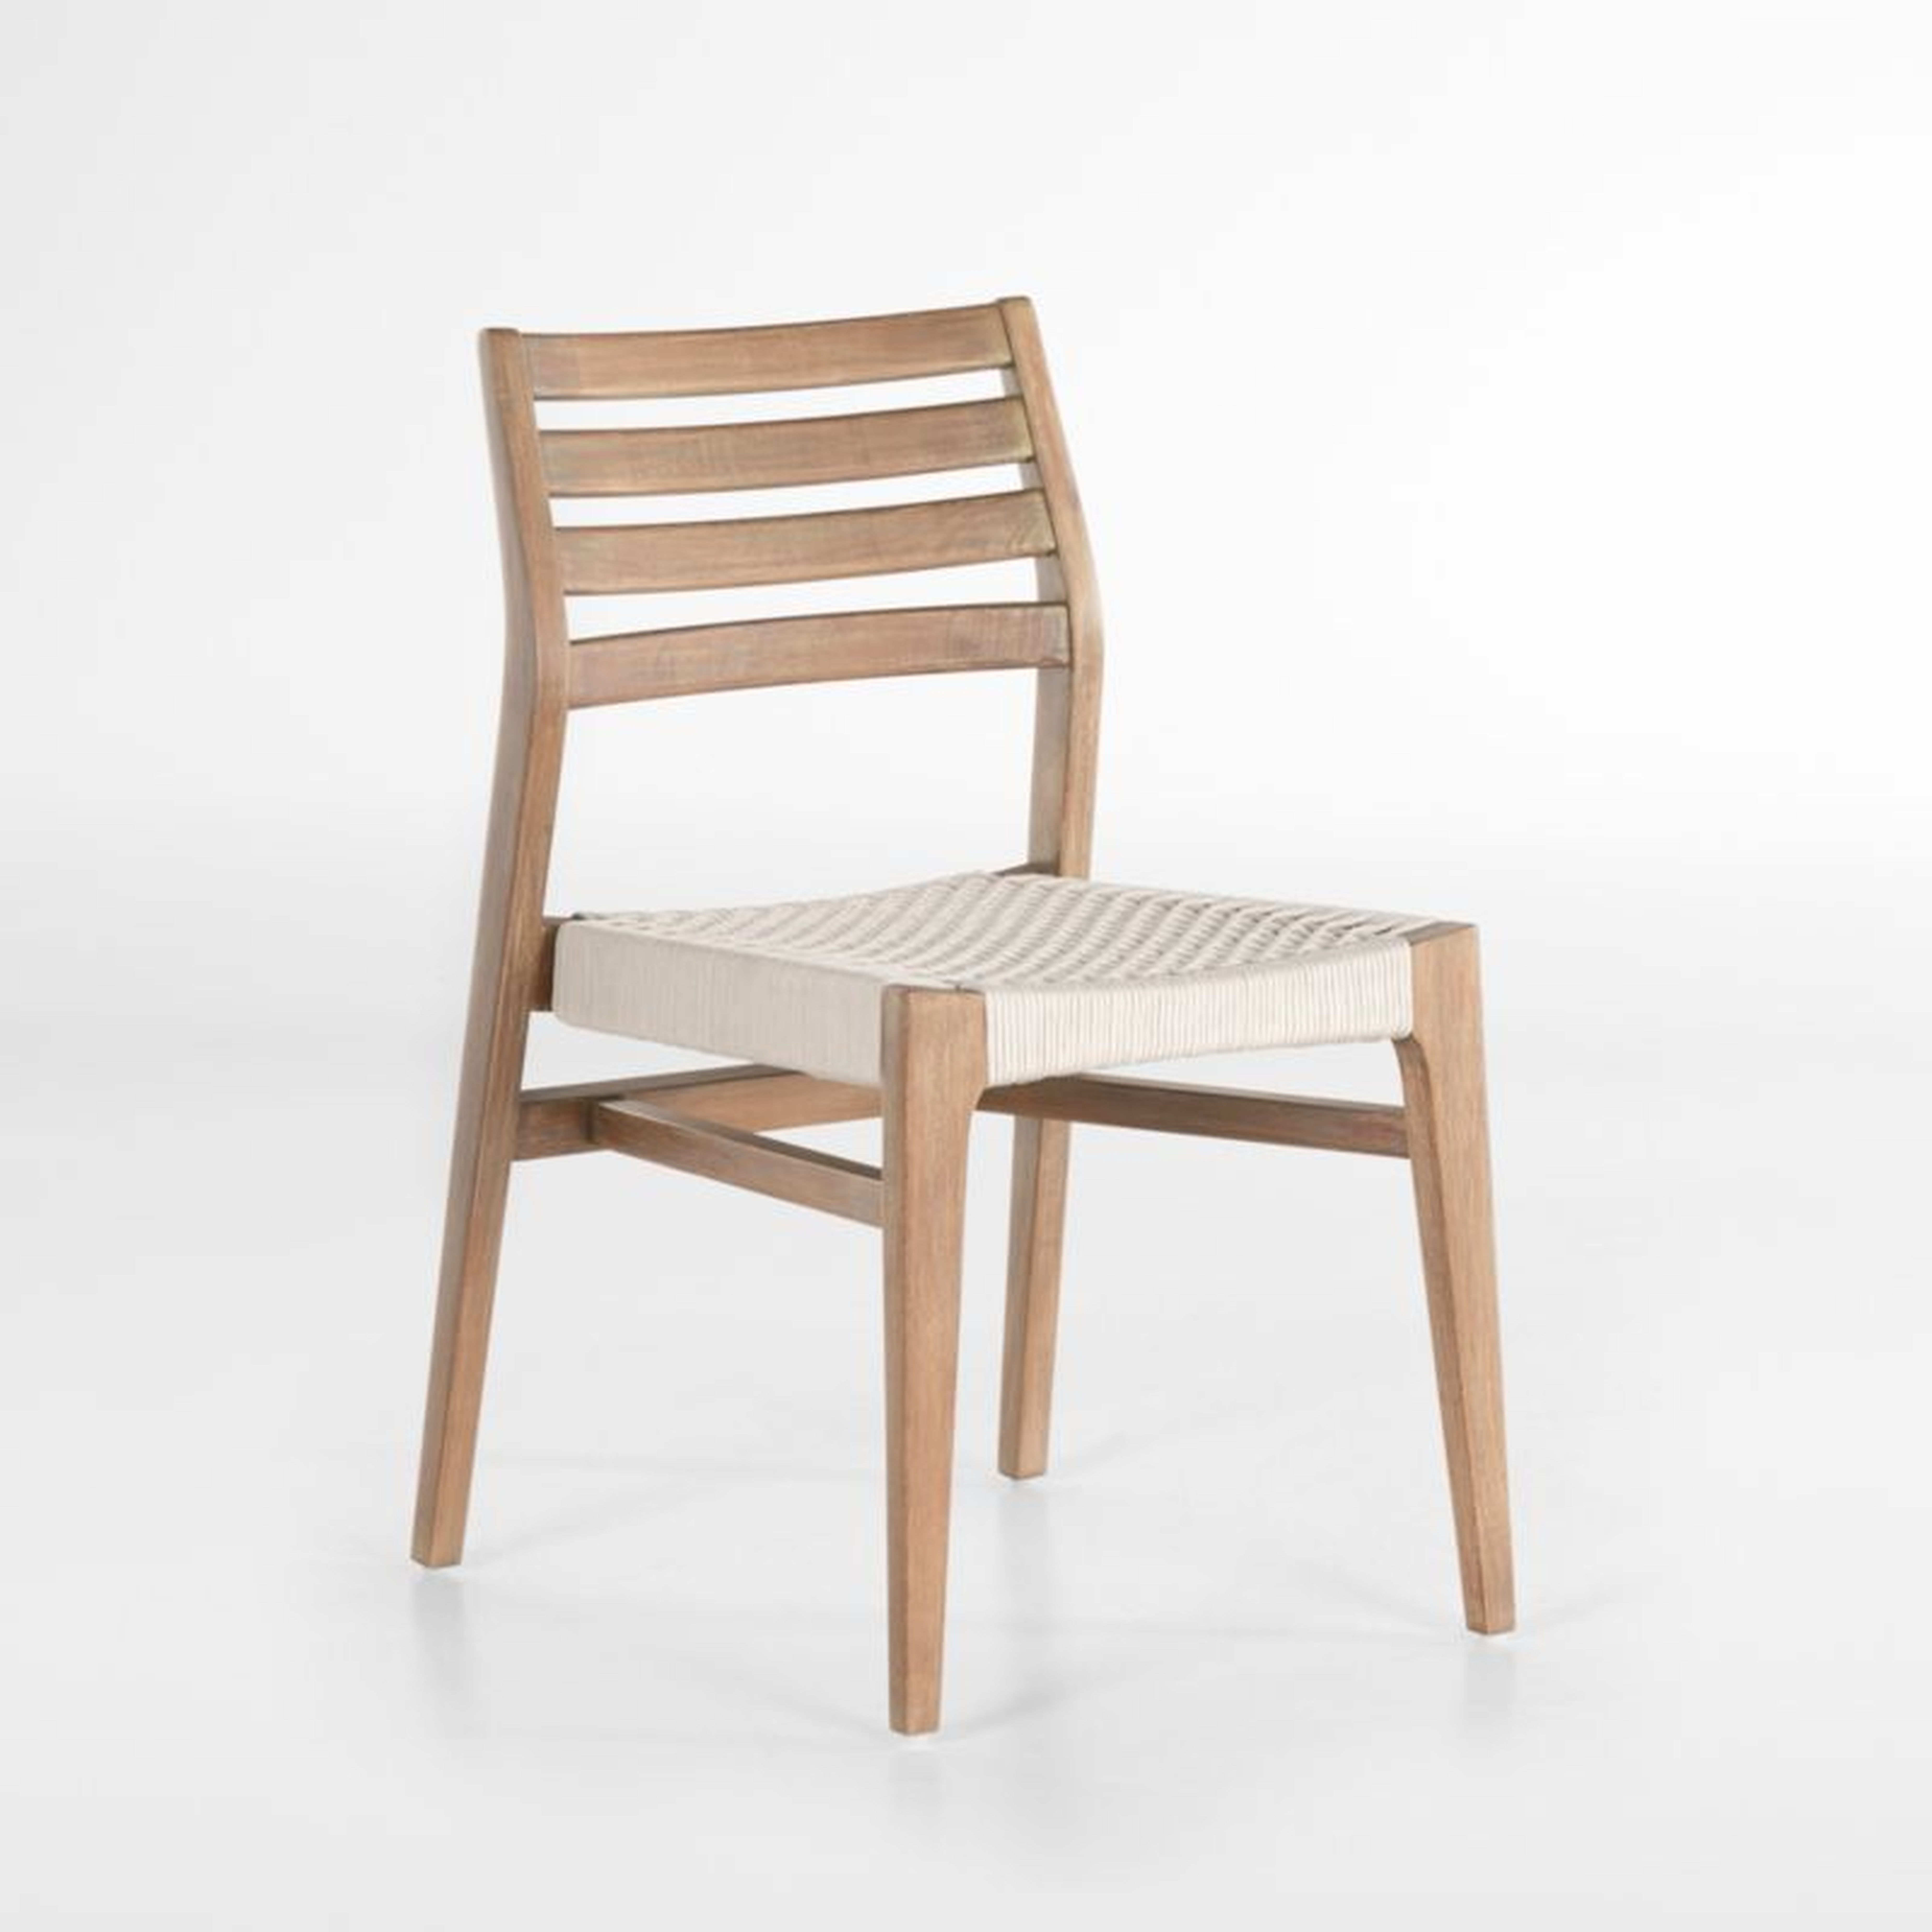 Cypress Outdoor Dining Chair - Crate and Barrel